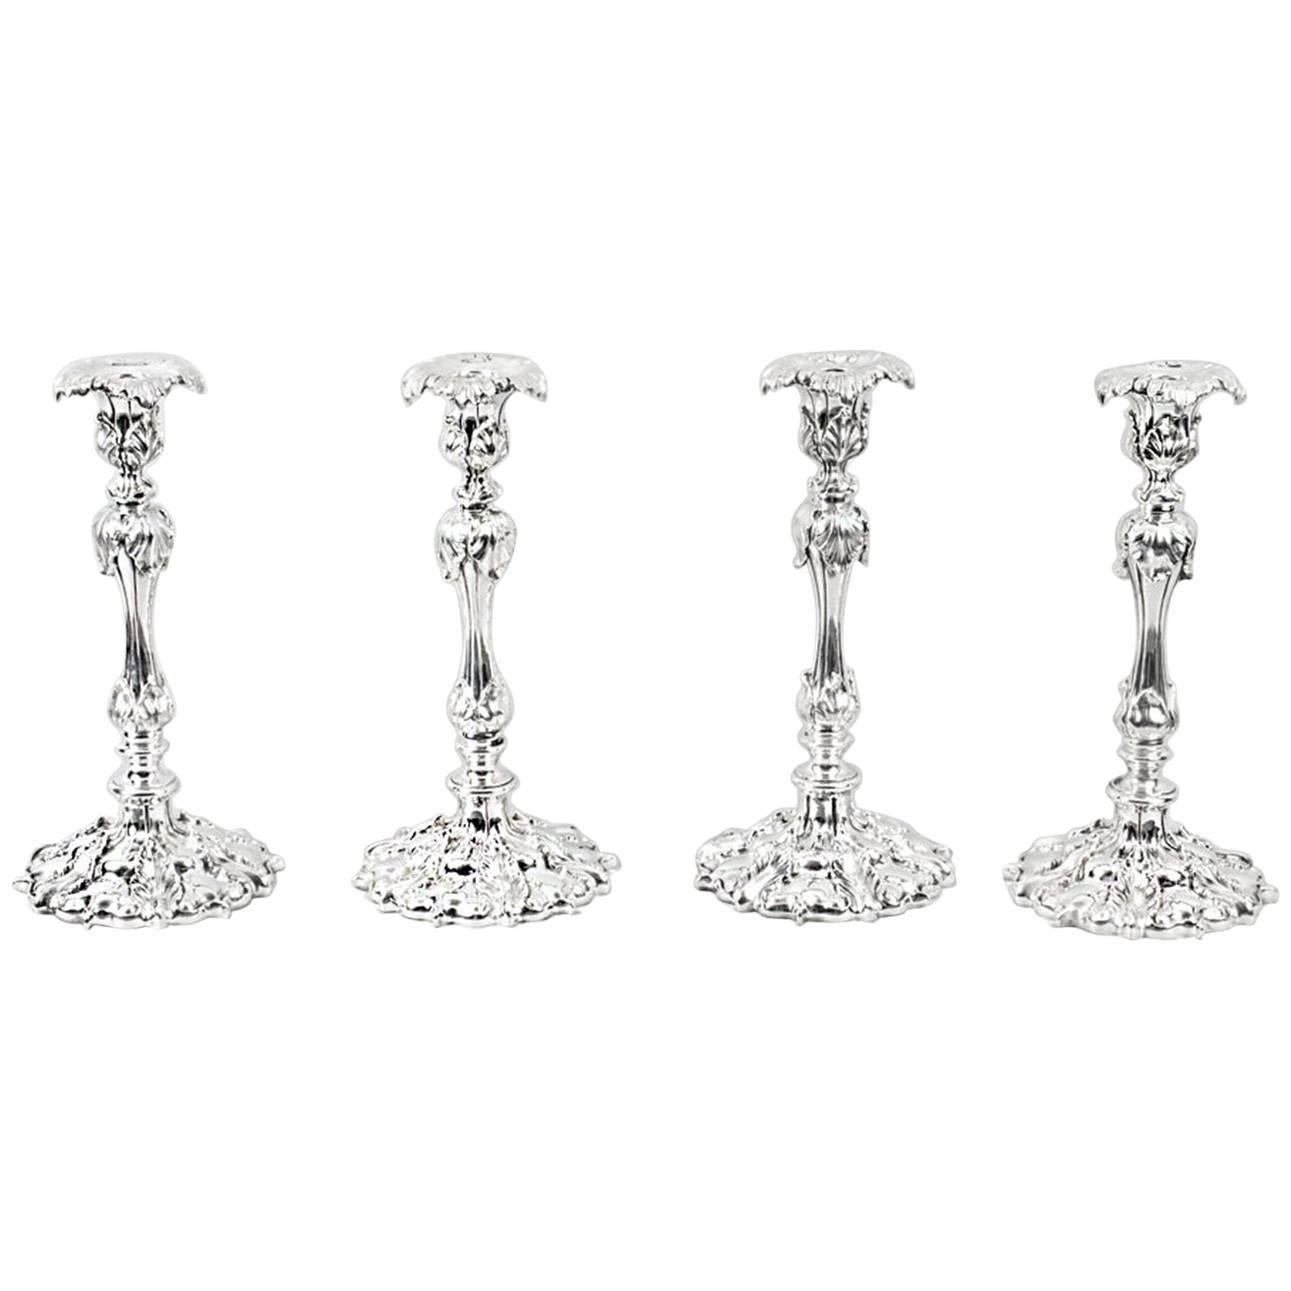 Antique Set of Four Silver Plate Candlesticks by Elkington & Co, 19th Century